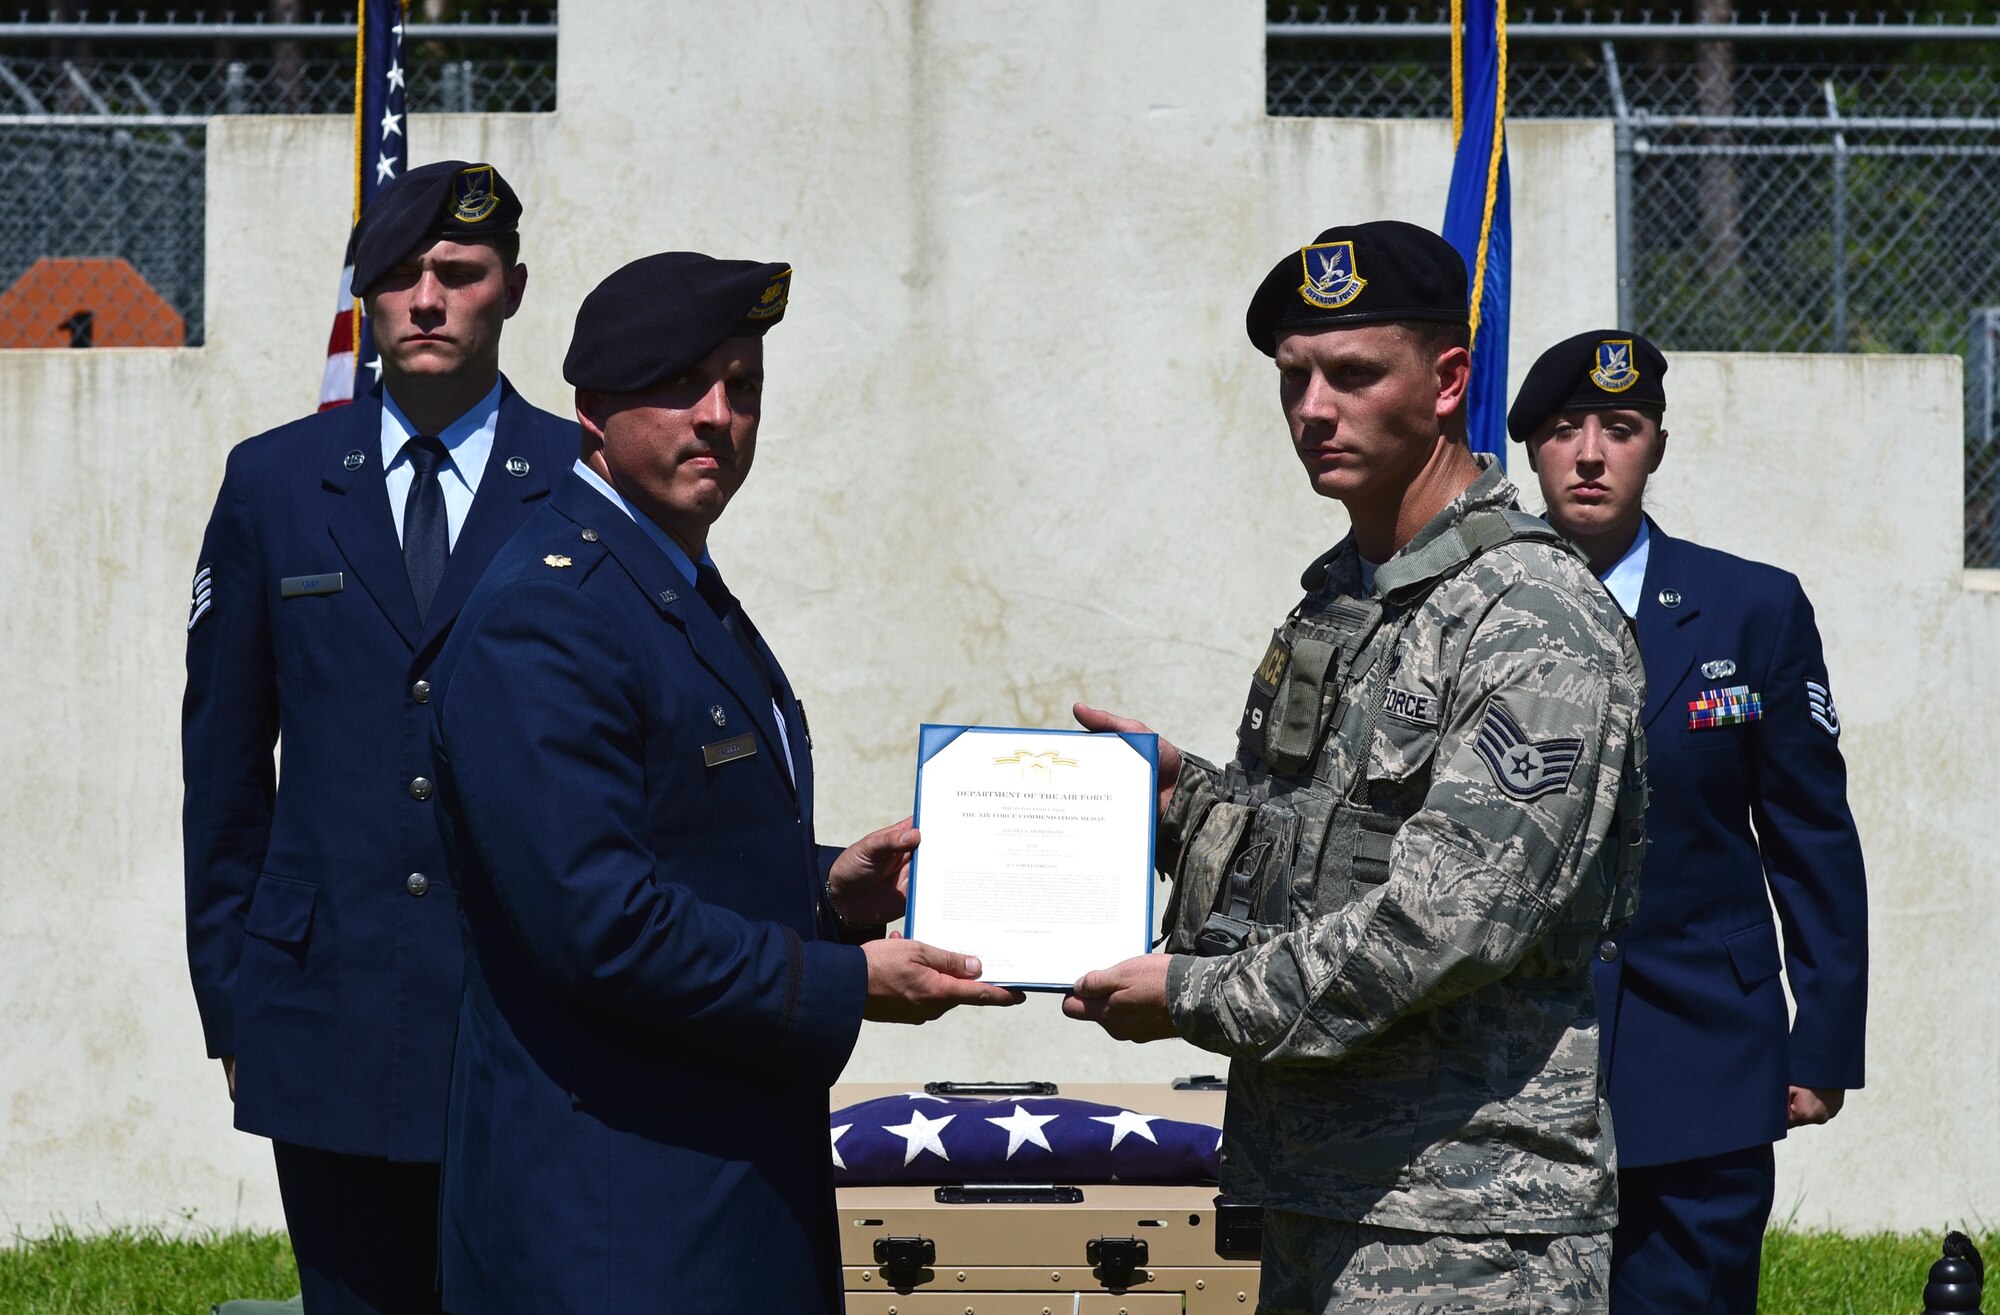 U.S. Air Force Maj. Joshua Frizzell, 325th Security Forces Squadron commander, left, presents a decoration to Staff Sgt. Quinton Pigg, prior 325th Security Forces Squadron military working dog (MWD) handler, right, on behalf of MWD Jack during Jack’s memorial service at Tyndall Air Force Base, Fla., Sept. 7, 2018. Jack, a Belgian Malinois, was an explosives and patrol dog who shared a special bond with his handlers. Pigg and Jack were paired together during their time at Tyndall. (U.S. Air Force photo by Senior Airman Isaiah J. Soliz)